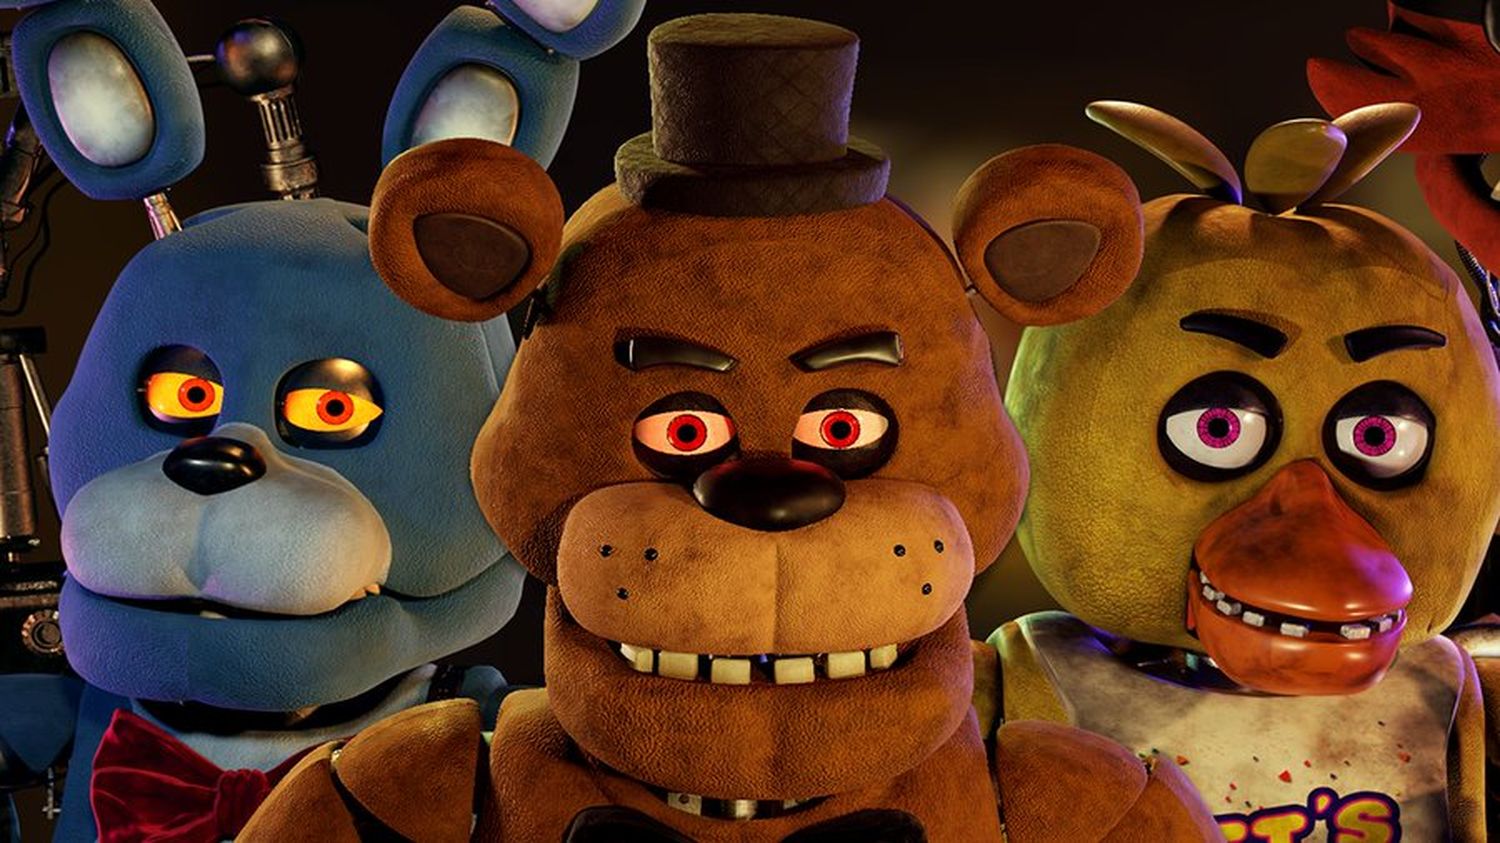 12 Best FNAF Gifts: Selections for Five Nights at Freddy's Fans